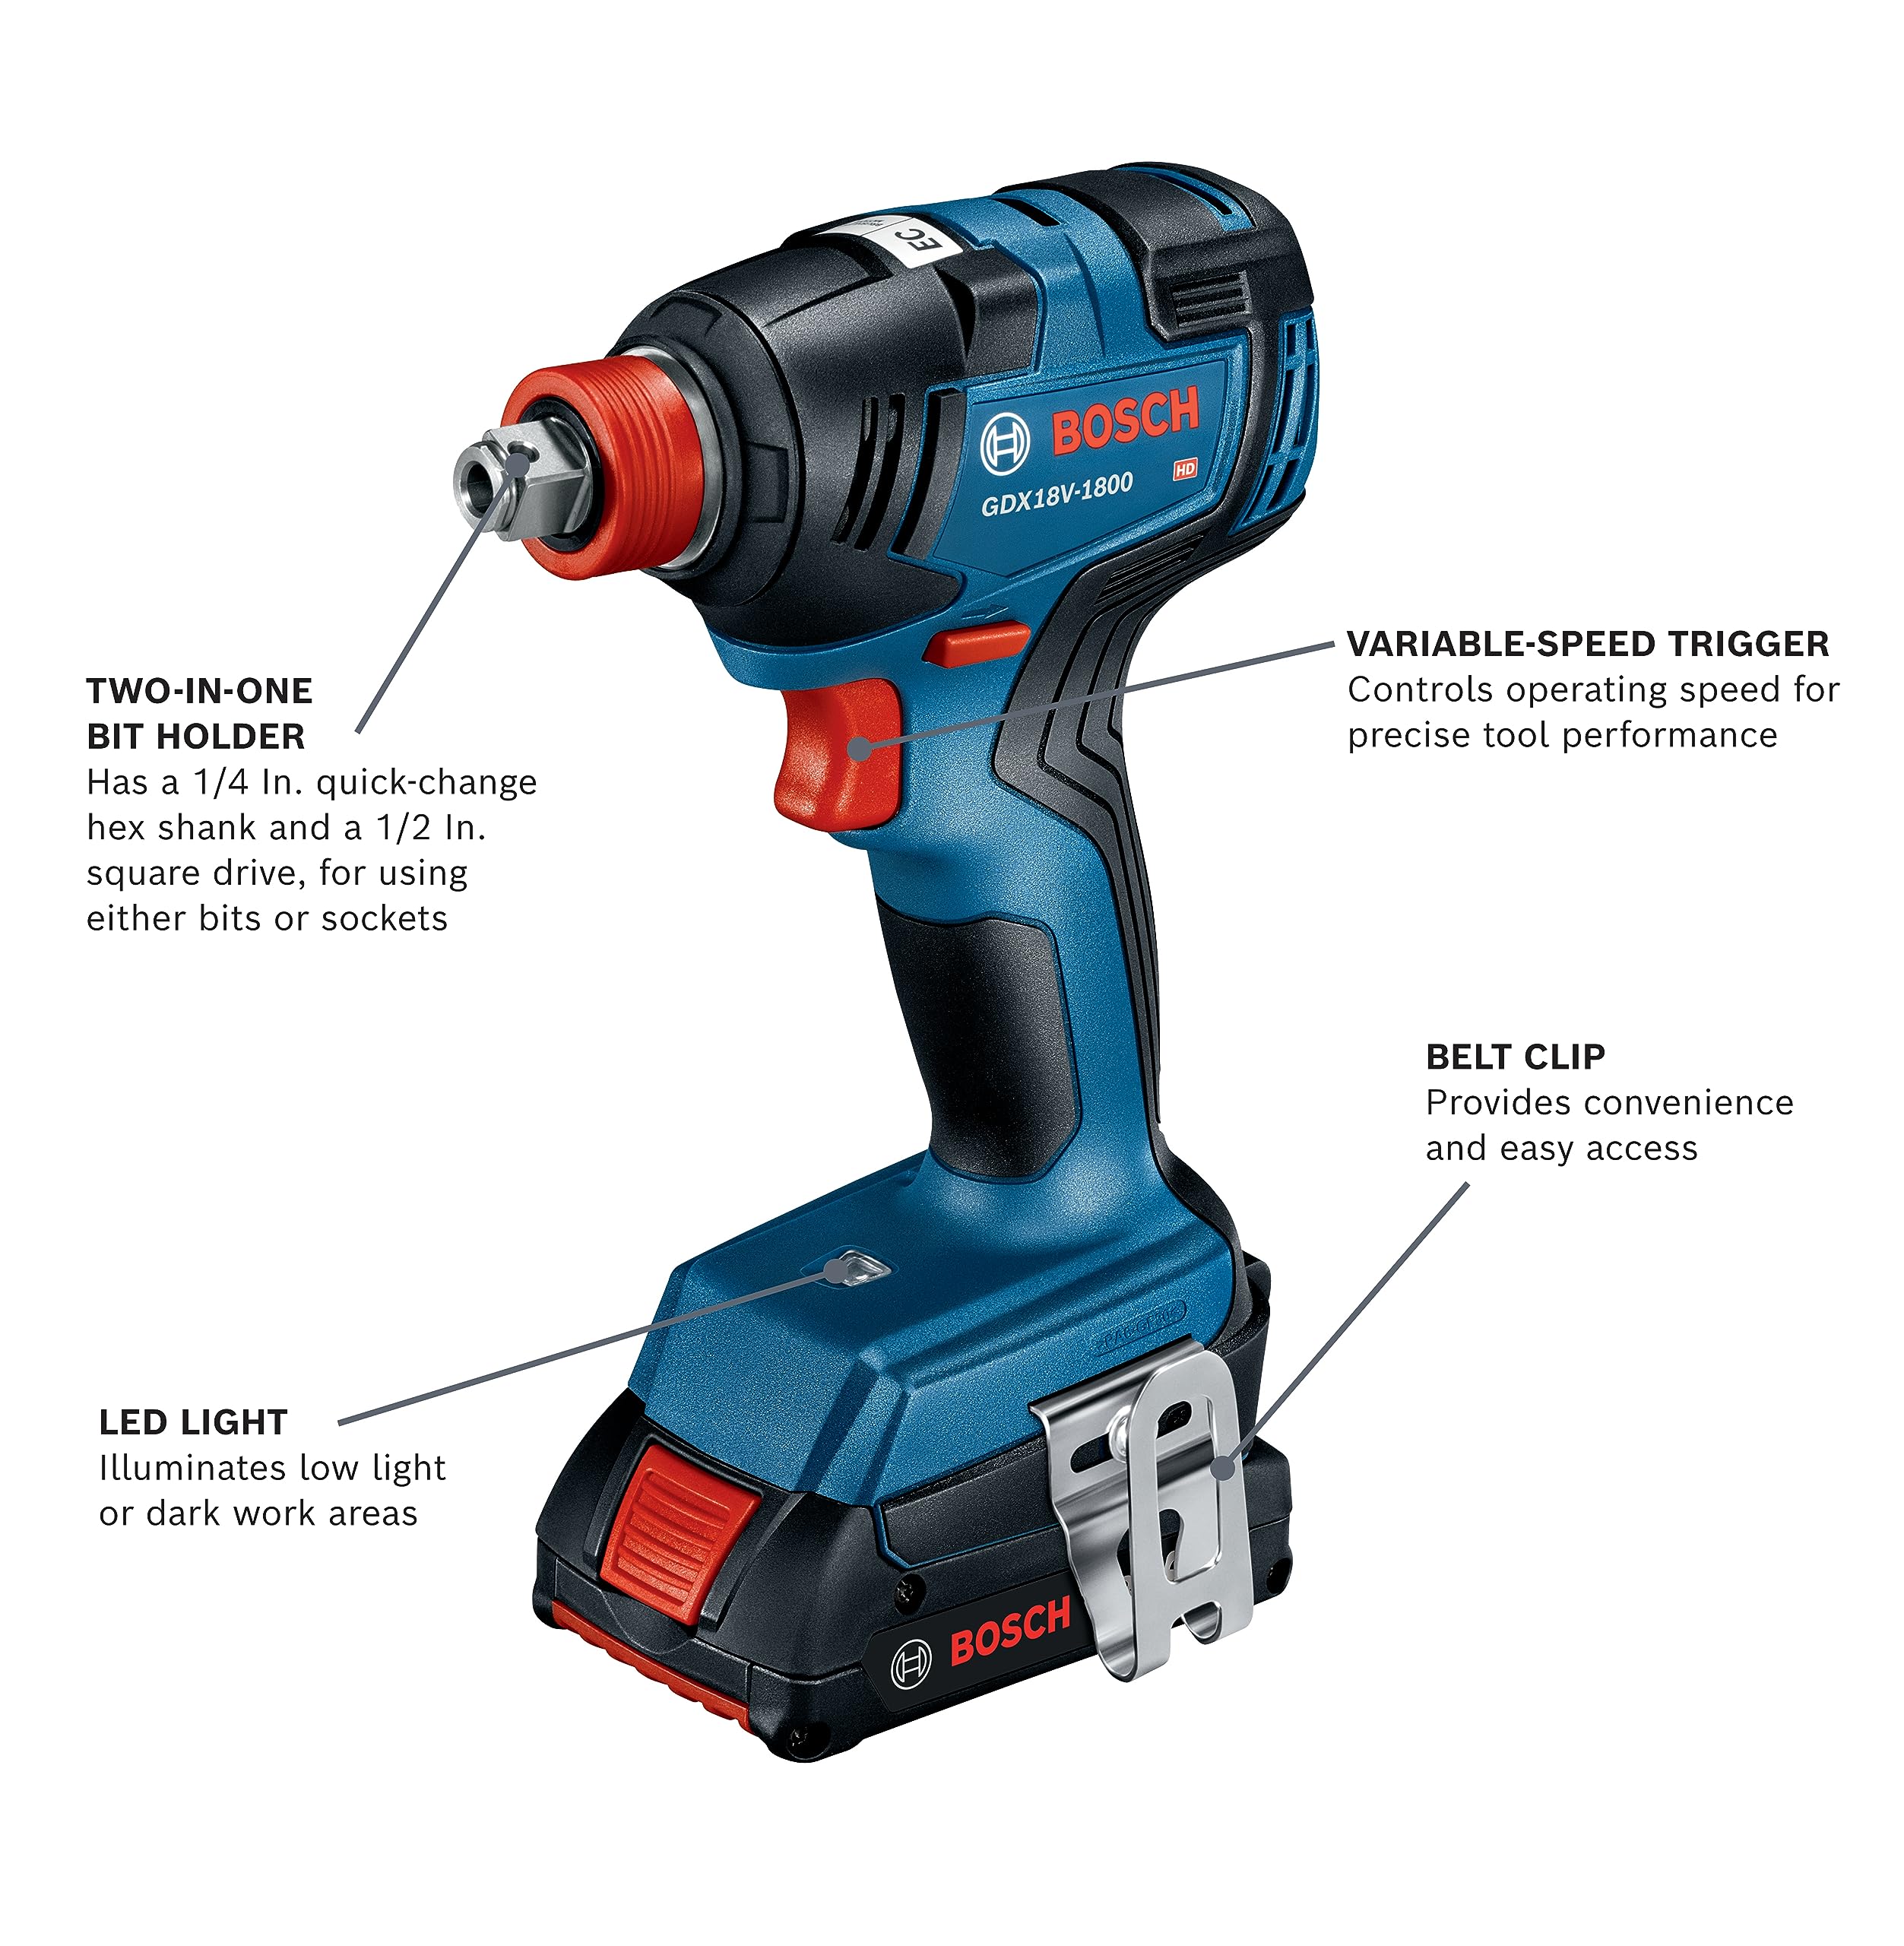 BOSCH GXL18V-601B25 18V 6-Tool Combo Kit with 2-In-1 Bit/Socket Impact Driver, Hammer Drill/Driver, Reciprocating Saw, Circular Saw, Angle Grinder, Floodlight and (2) CORE18V 4 Ah Compact Batteries